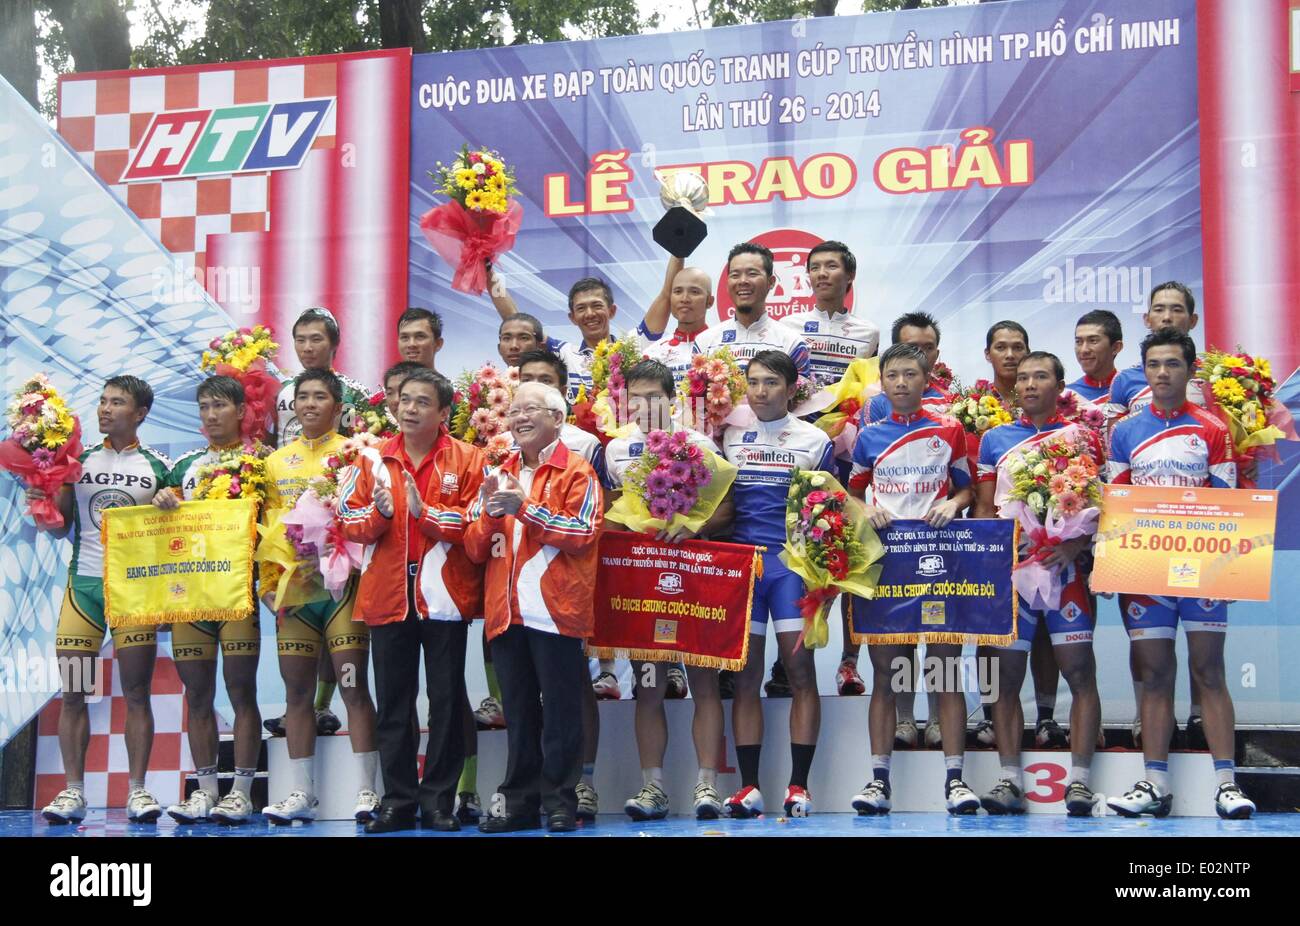 Ho Chi Minh City, Vietnam. 30th Apr, 2014. Suntek Sao Viet team celebrate  at the awarding ceremony after winning the team champion of the 26th Ho Chi  Minh city television cup cycling